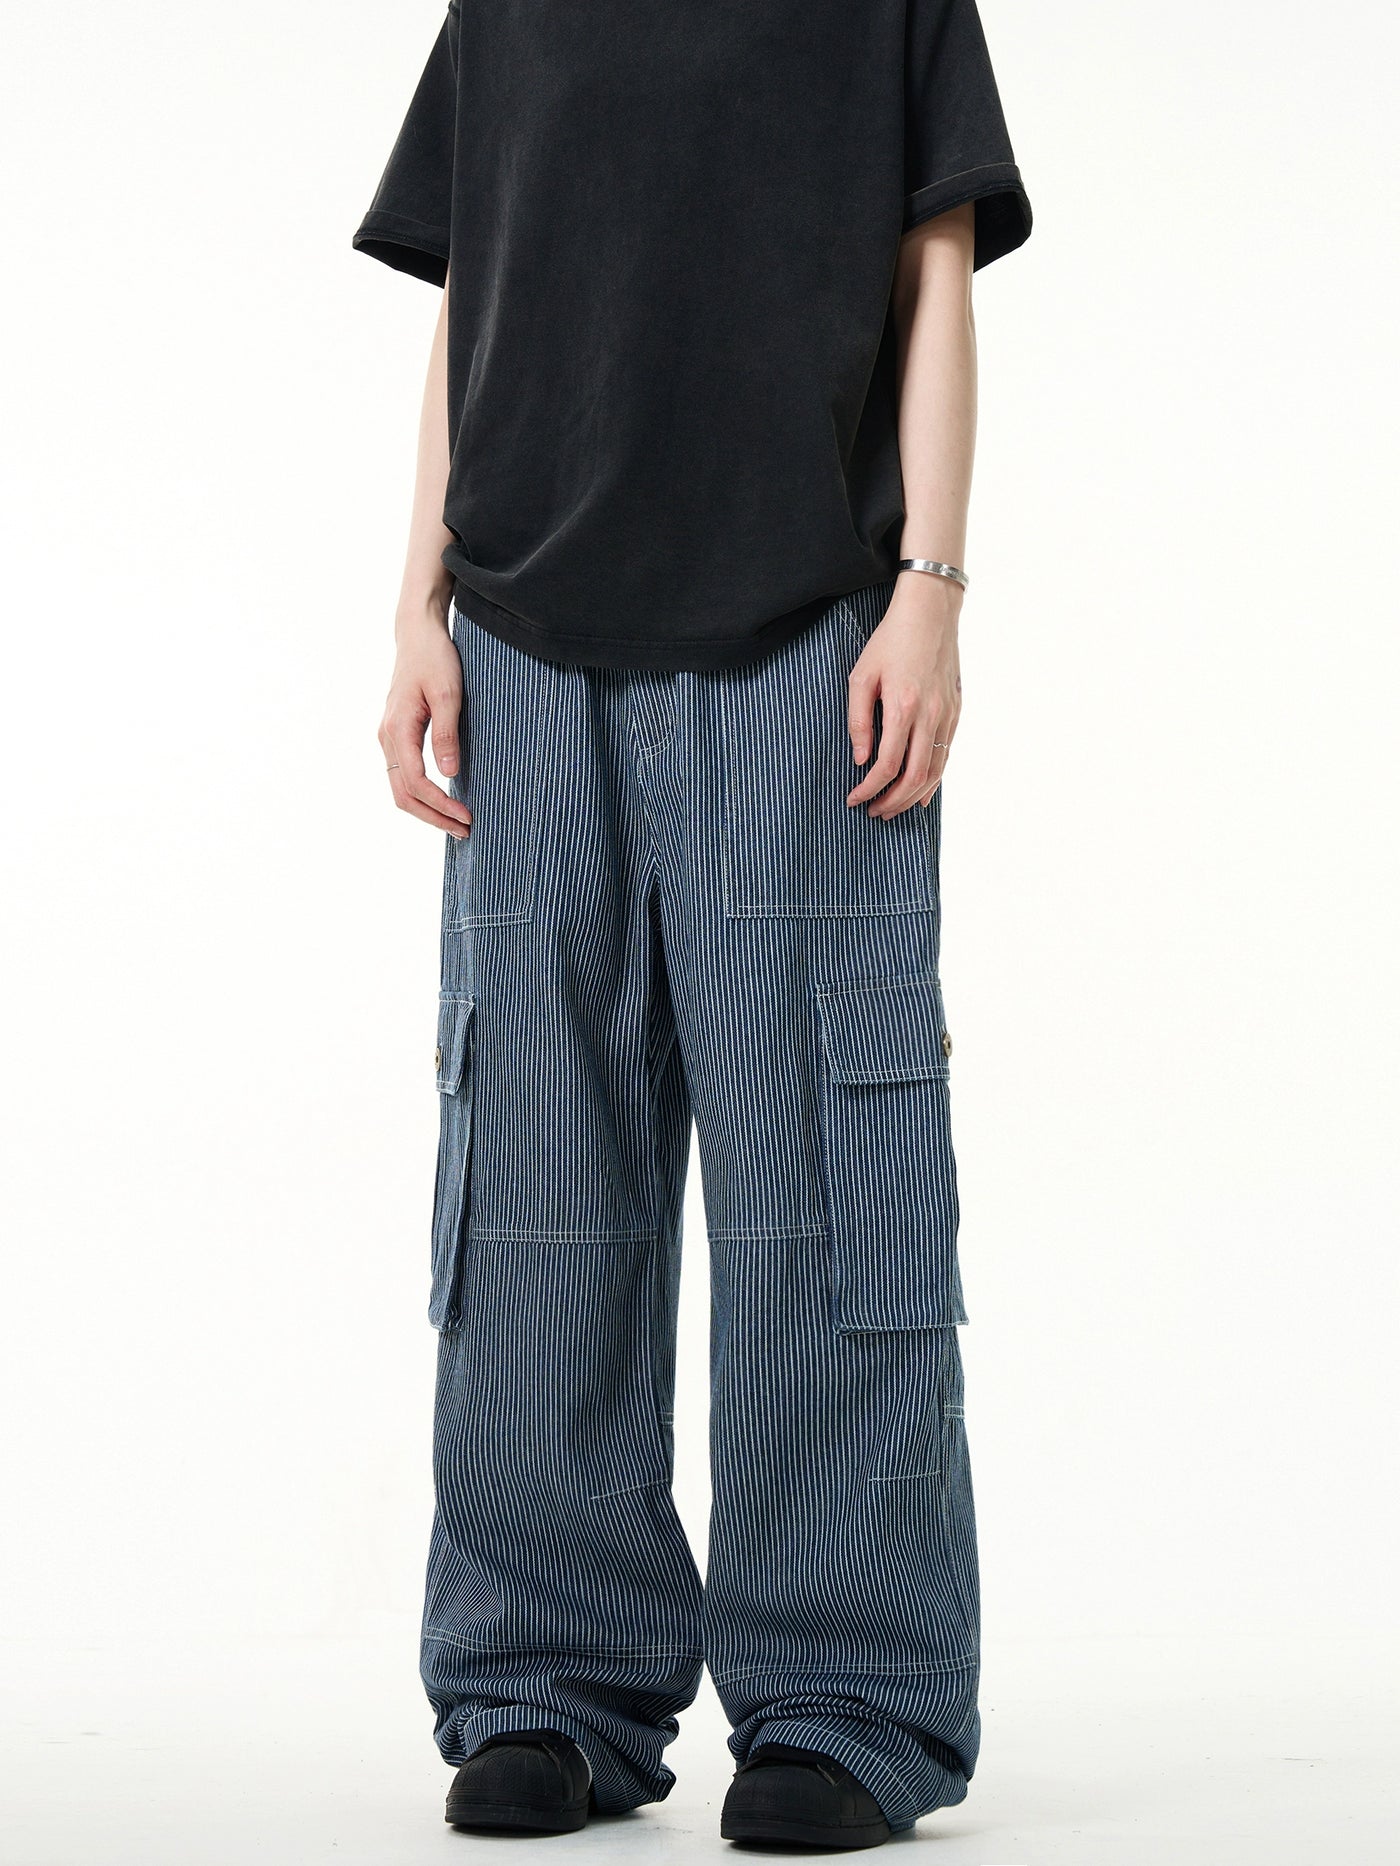 Bank Stripes Cargo Jeans Korean Street Fashion Jeans By Mad Witch Shop Online at OH Vault